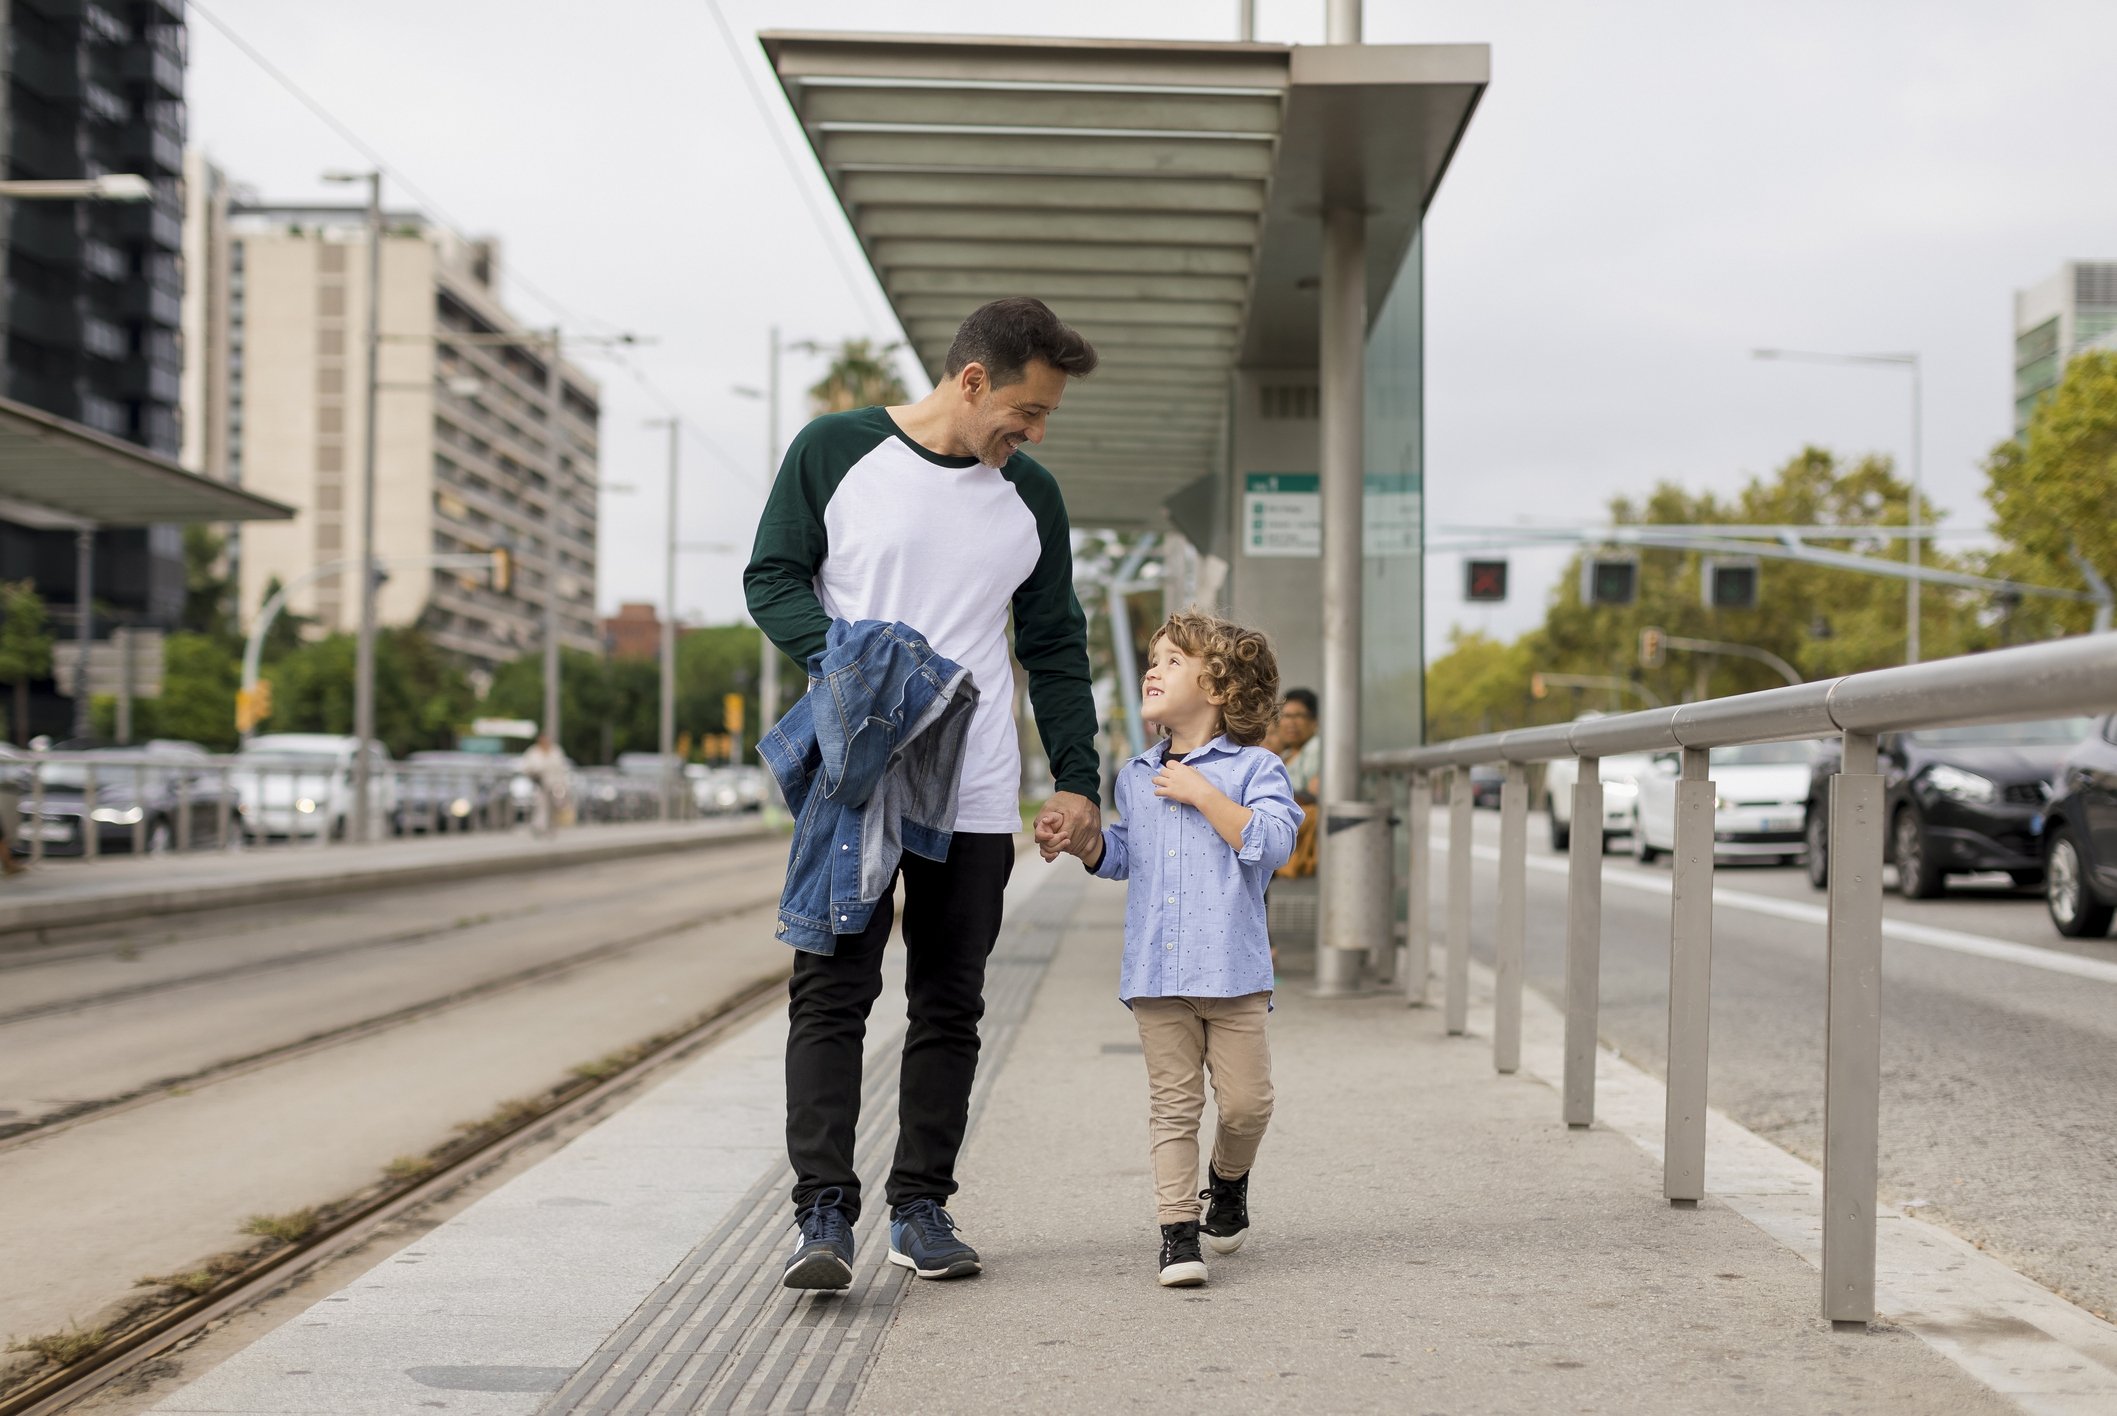 Smiling father and son walking hand in hand at tram stop in the city | Photo: Getty Images